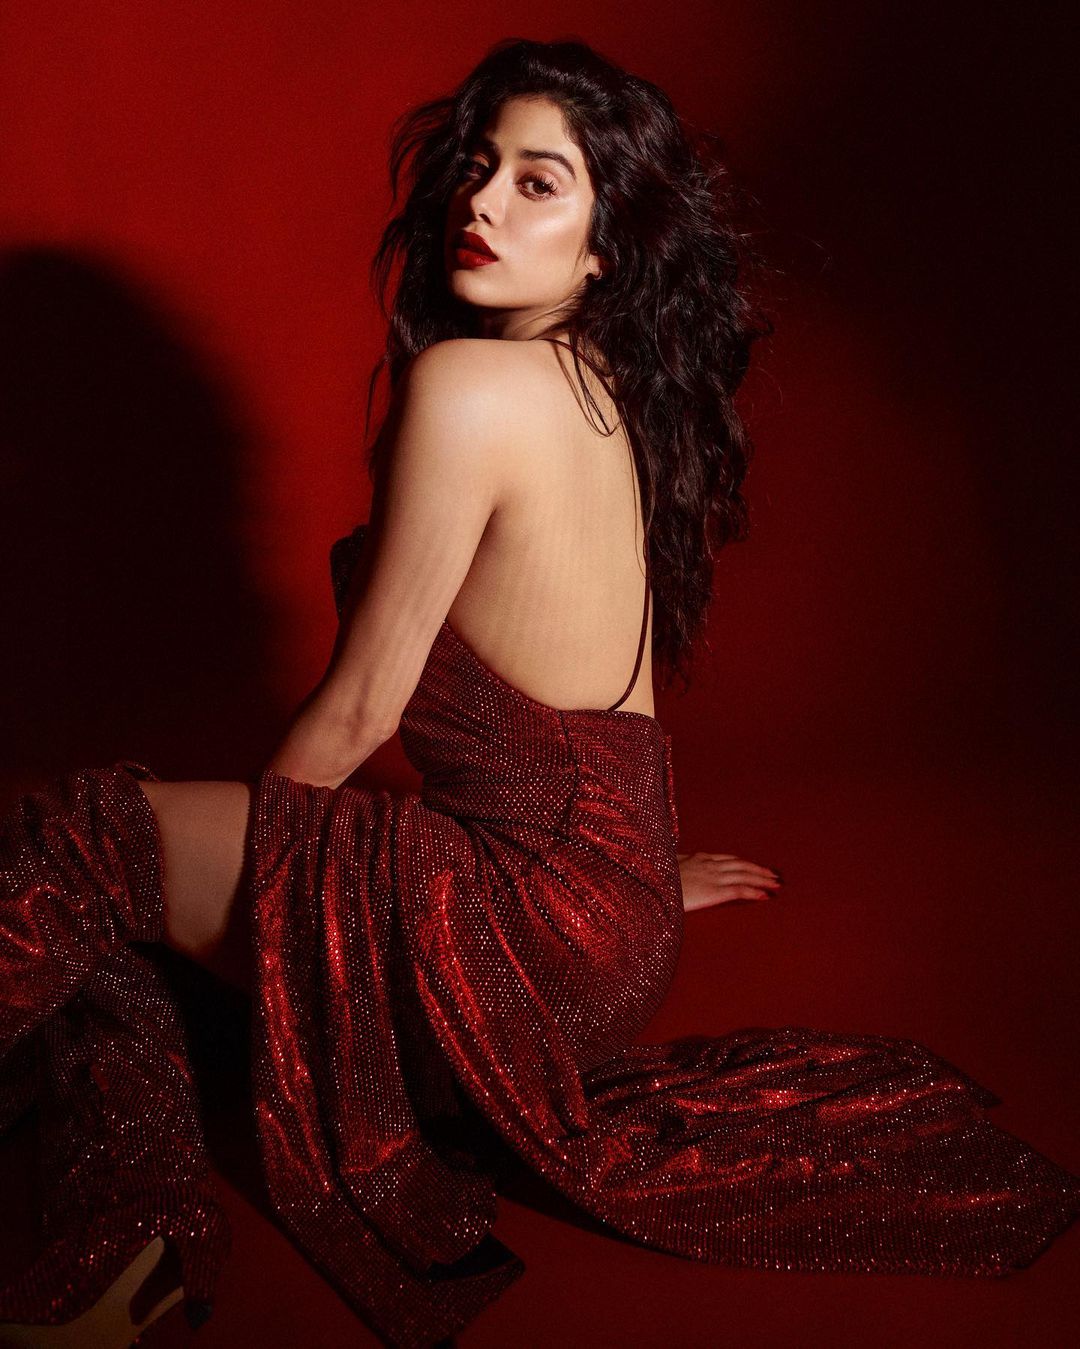 Janhvi Kapoor sparkles in glittery backless red flared gown, Arjun Kapoor says “time to make merry” | IWMBuzz